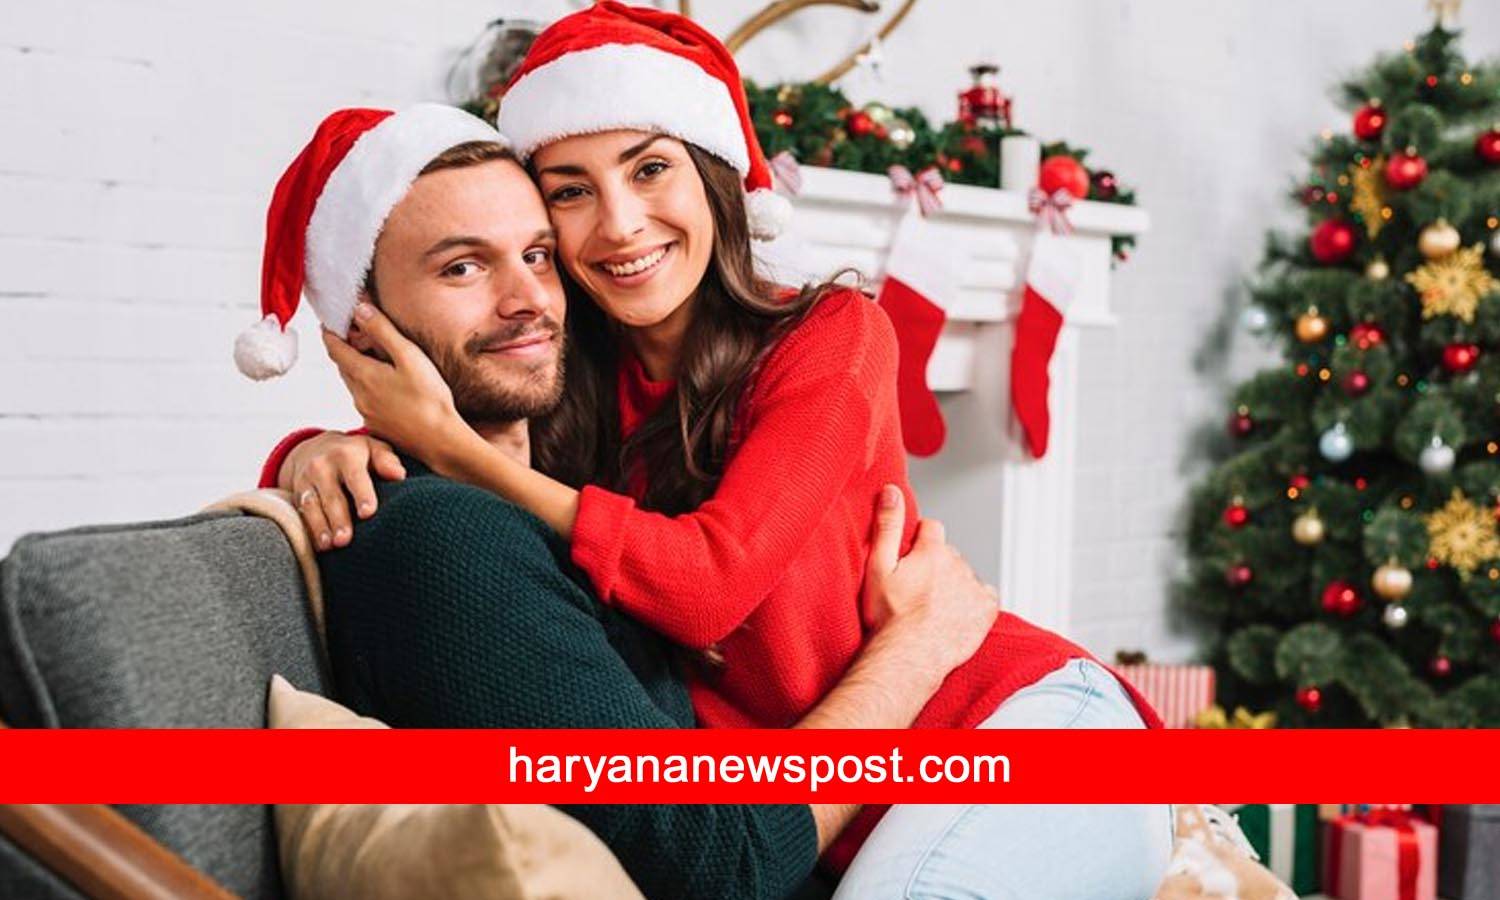 Romantic Christmas image Messages for Husband